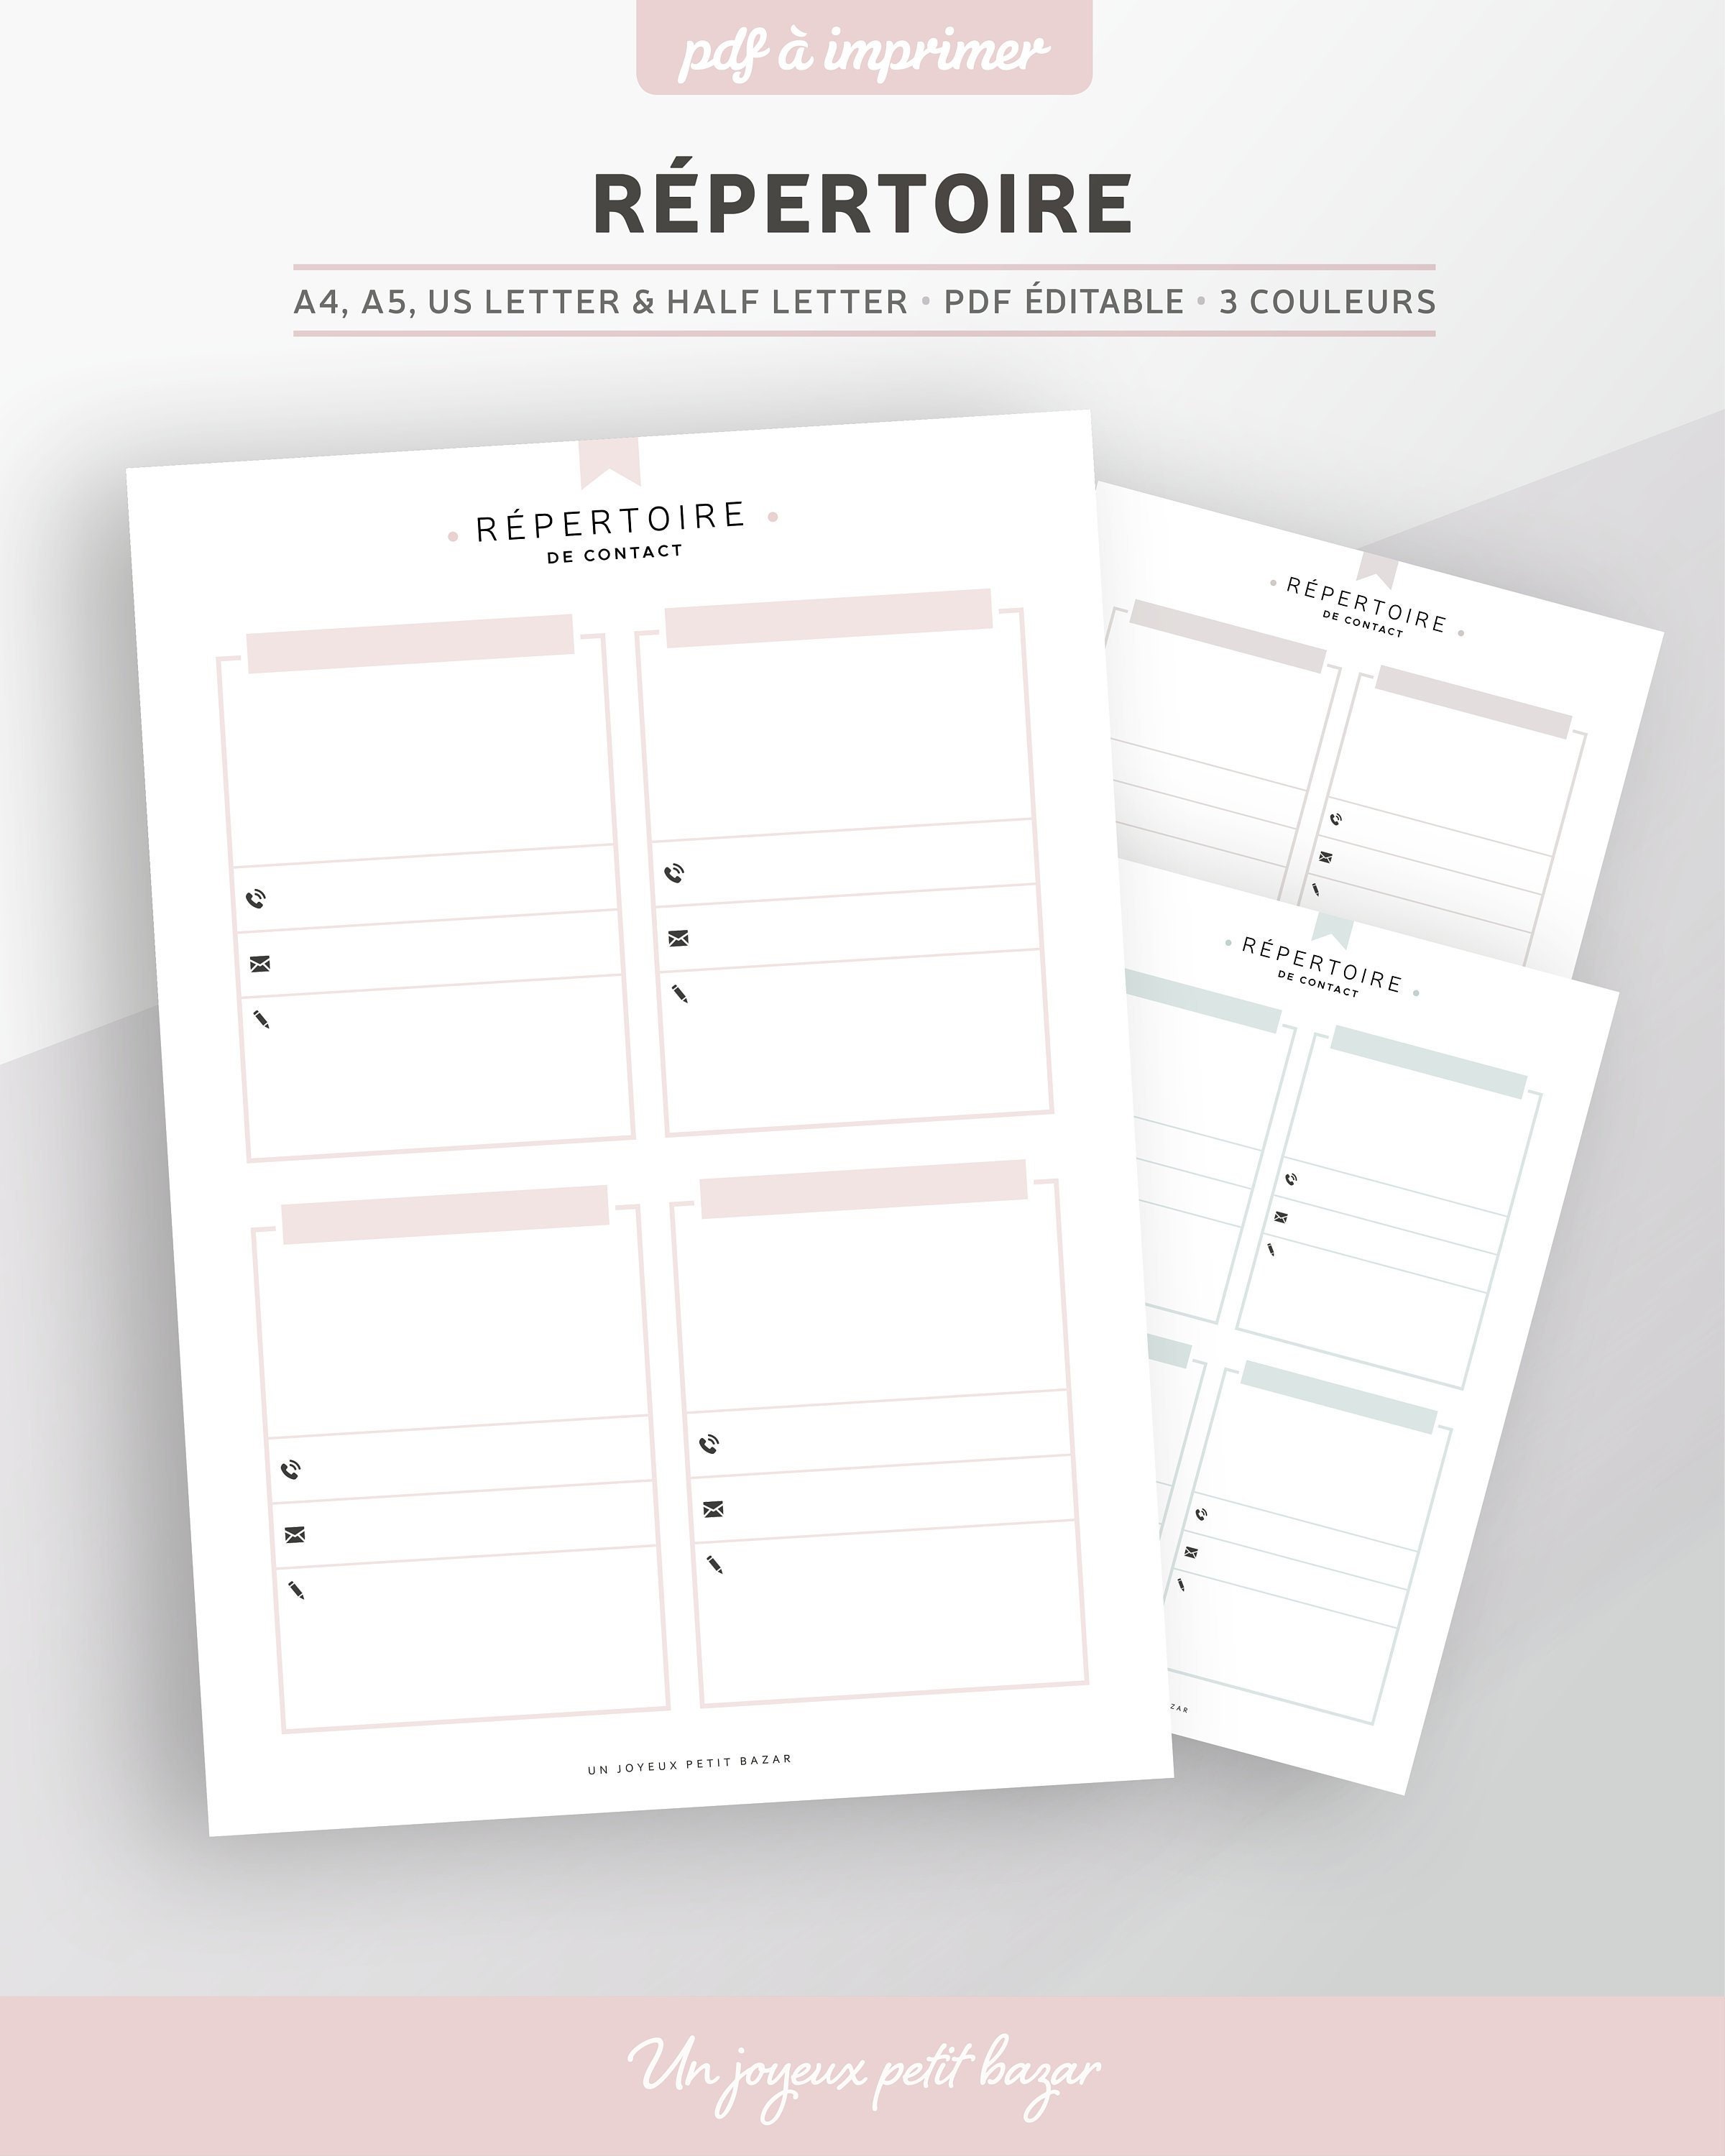 Telephone Directory & Address Book to Print, Editable PDF, A5 or A4 Planner  Refill in French, 3 Colors: Pink, Mint, Gray 